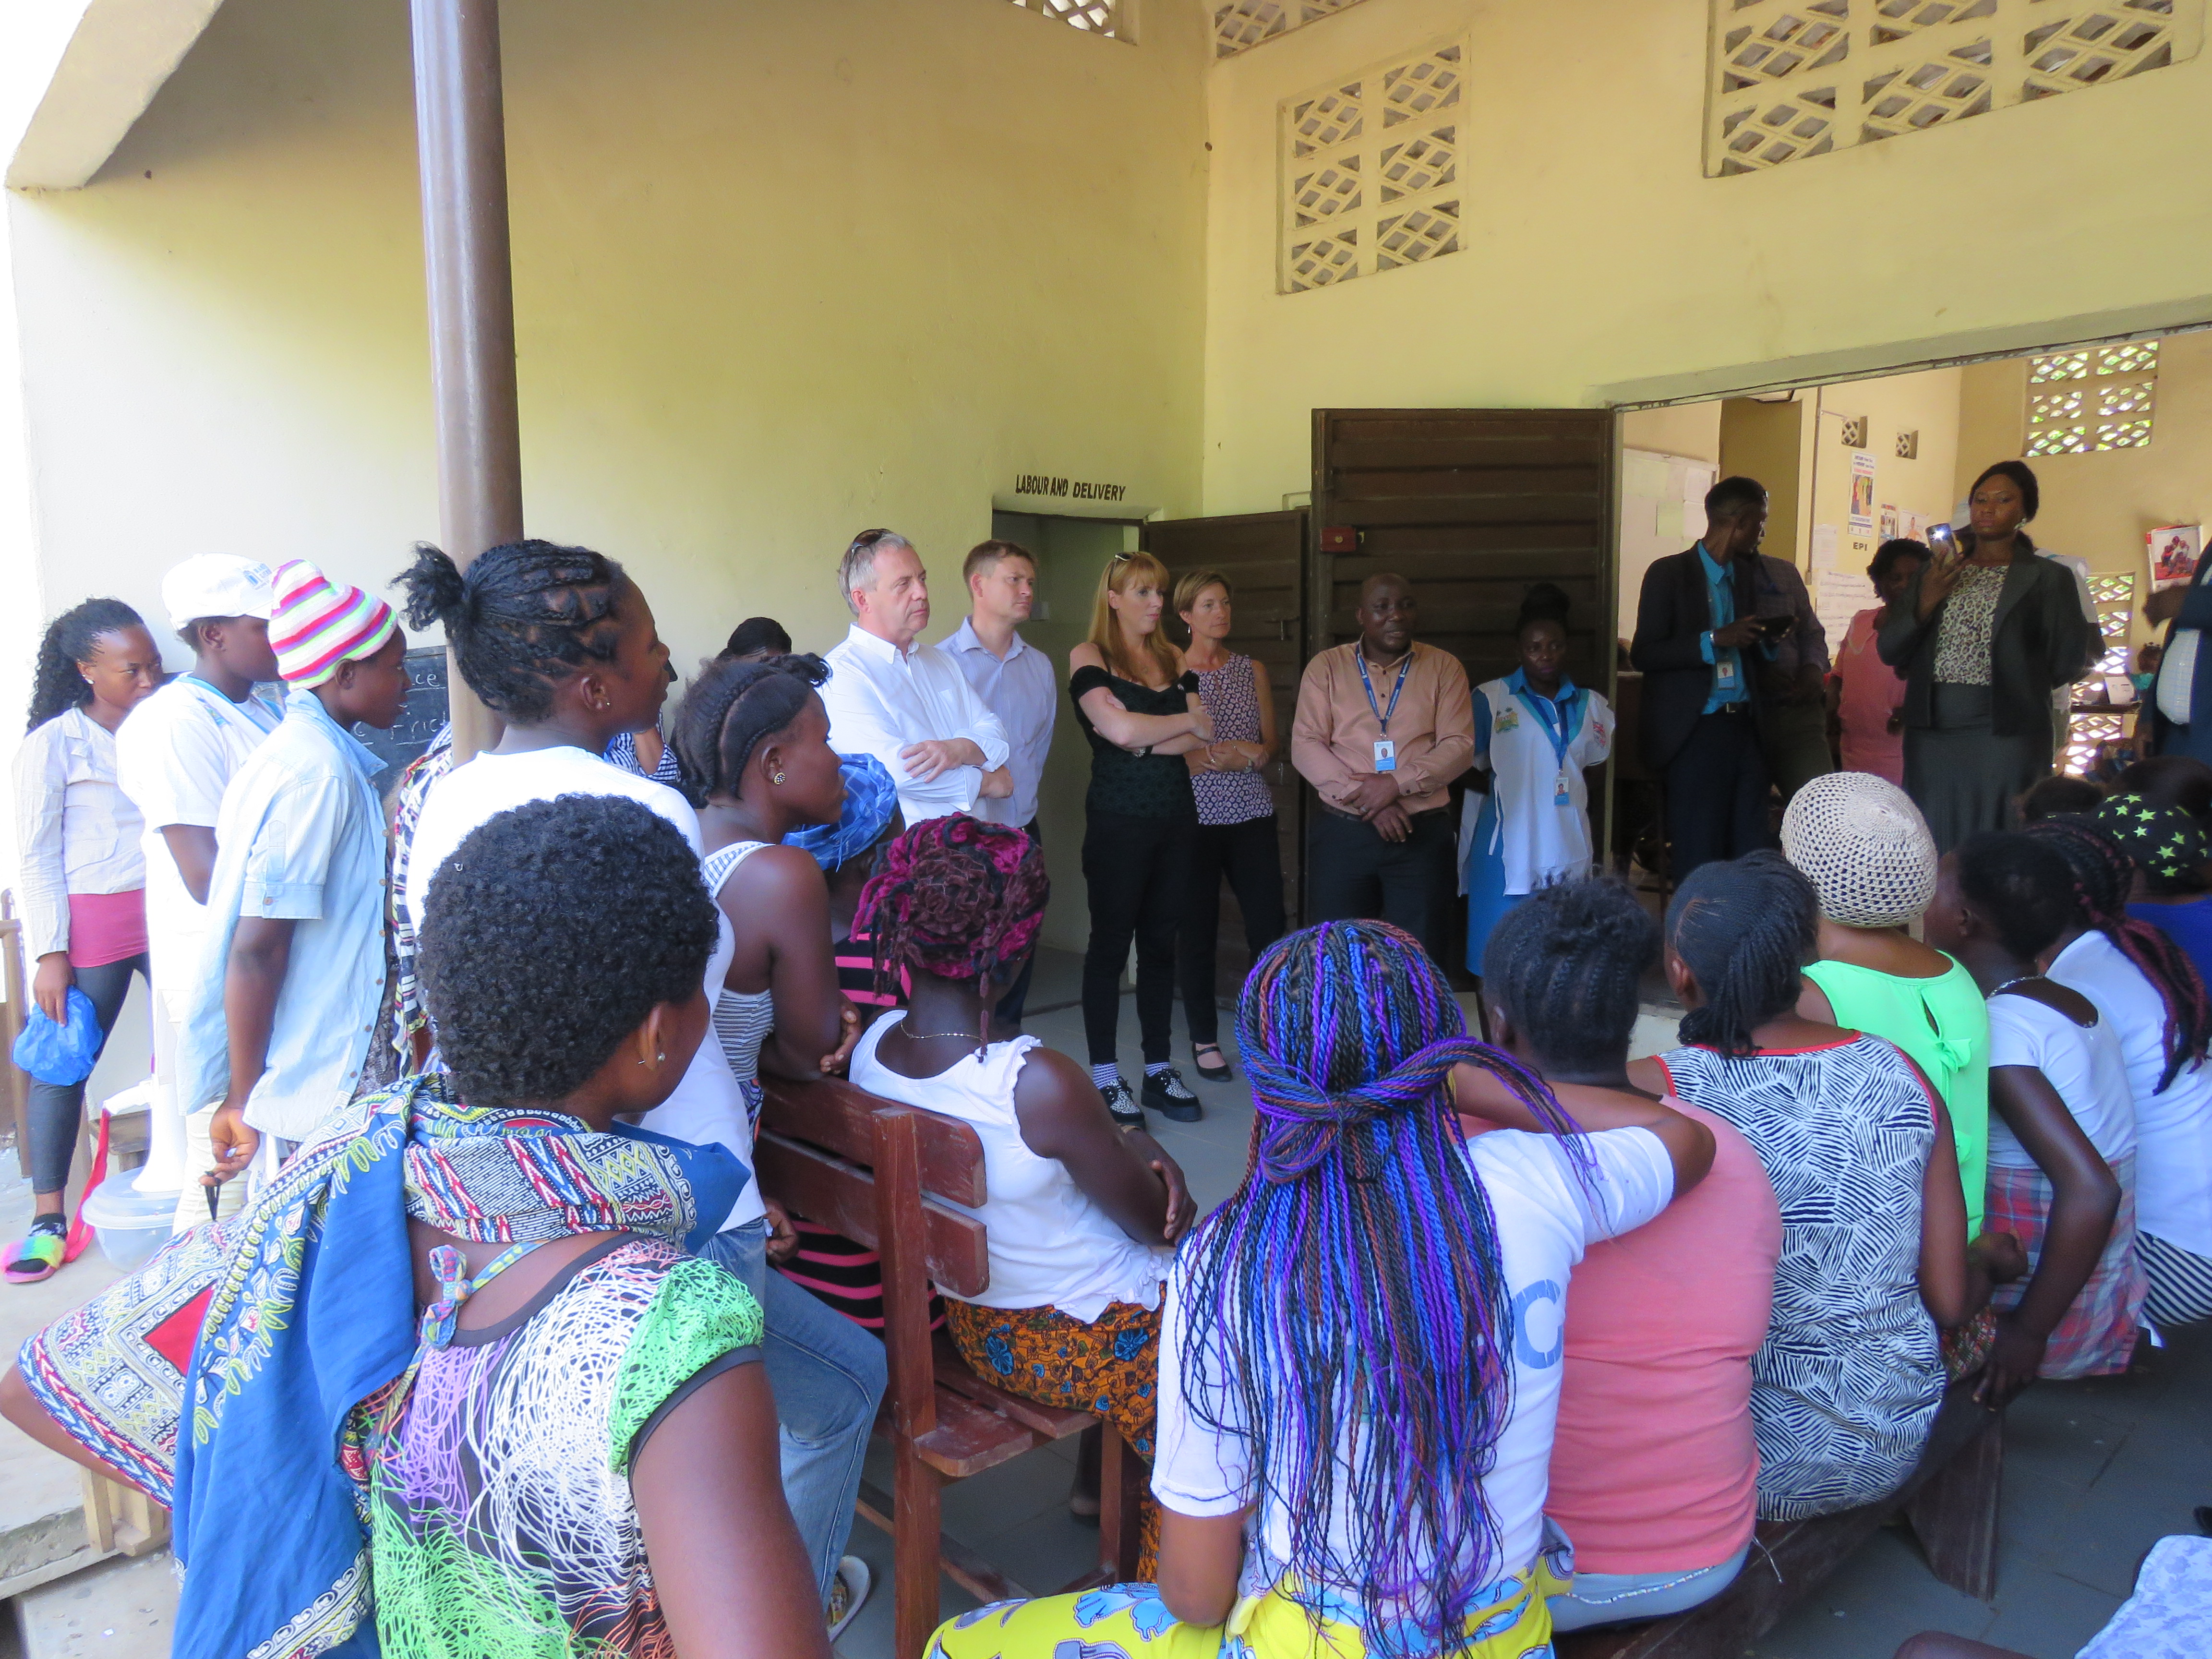 Visiting a Marie Stopes International Outreach Service